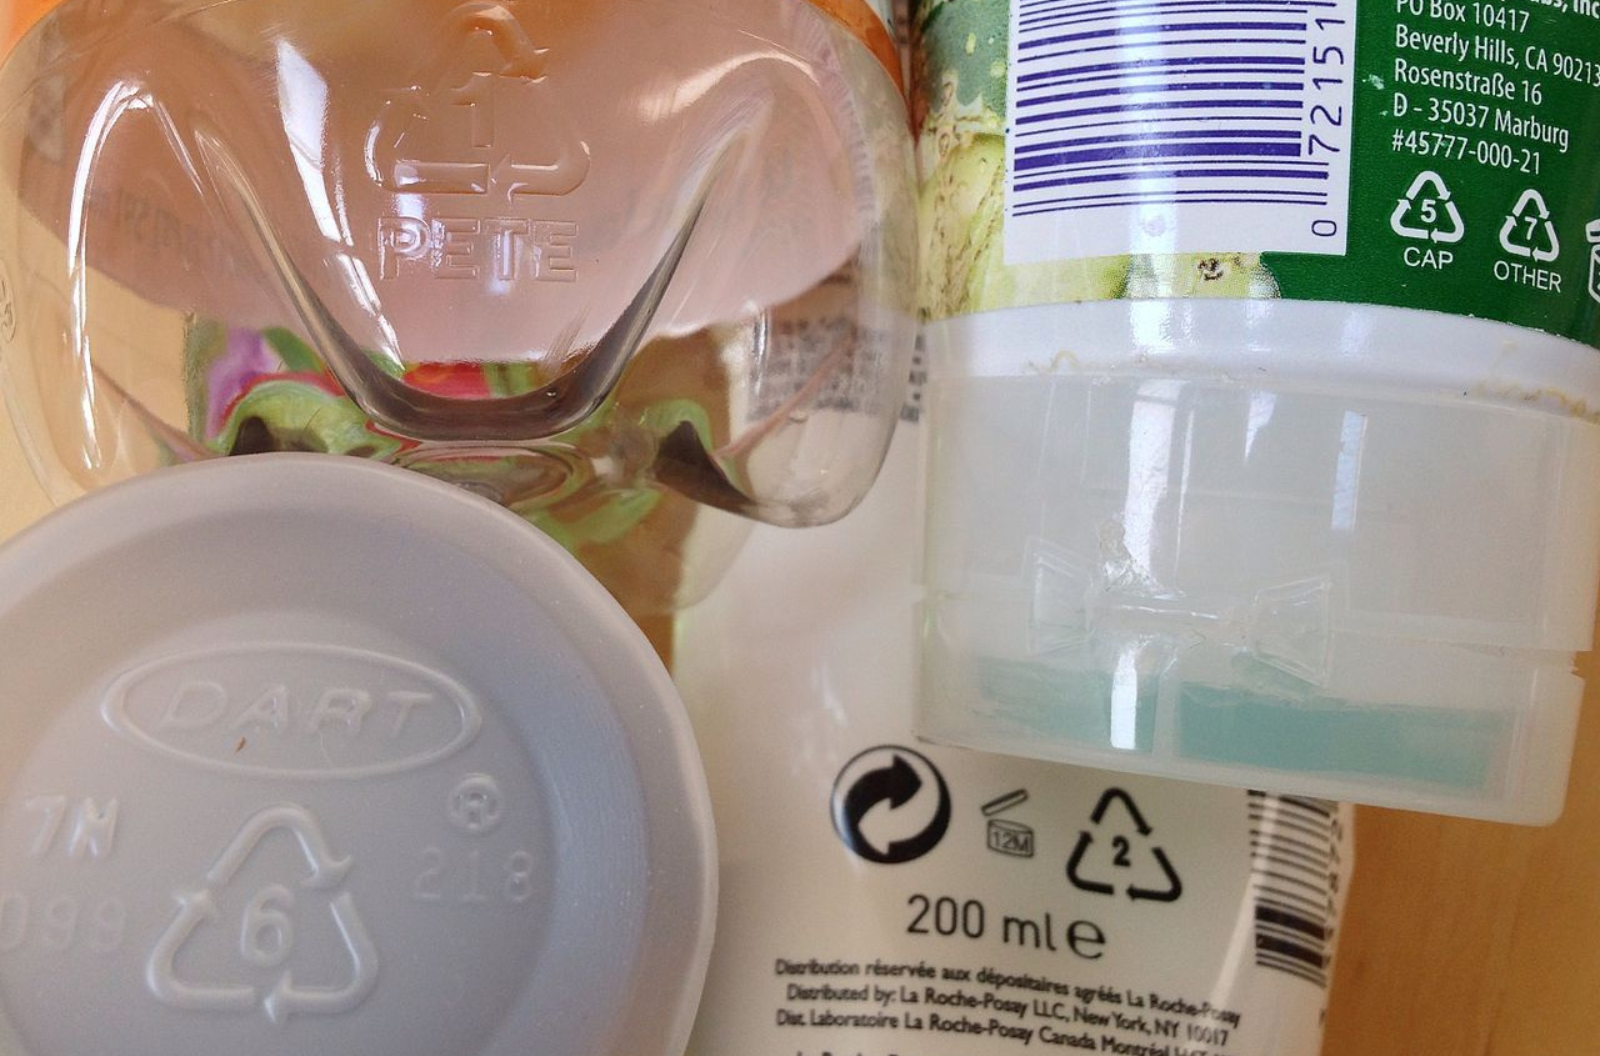 A variety of plastic containers all with recycling codes showing a number centered in a triangle with arrows.